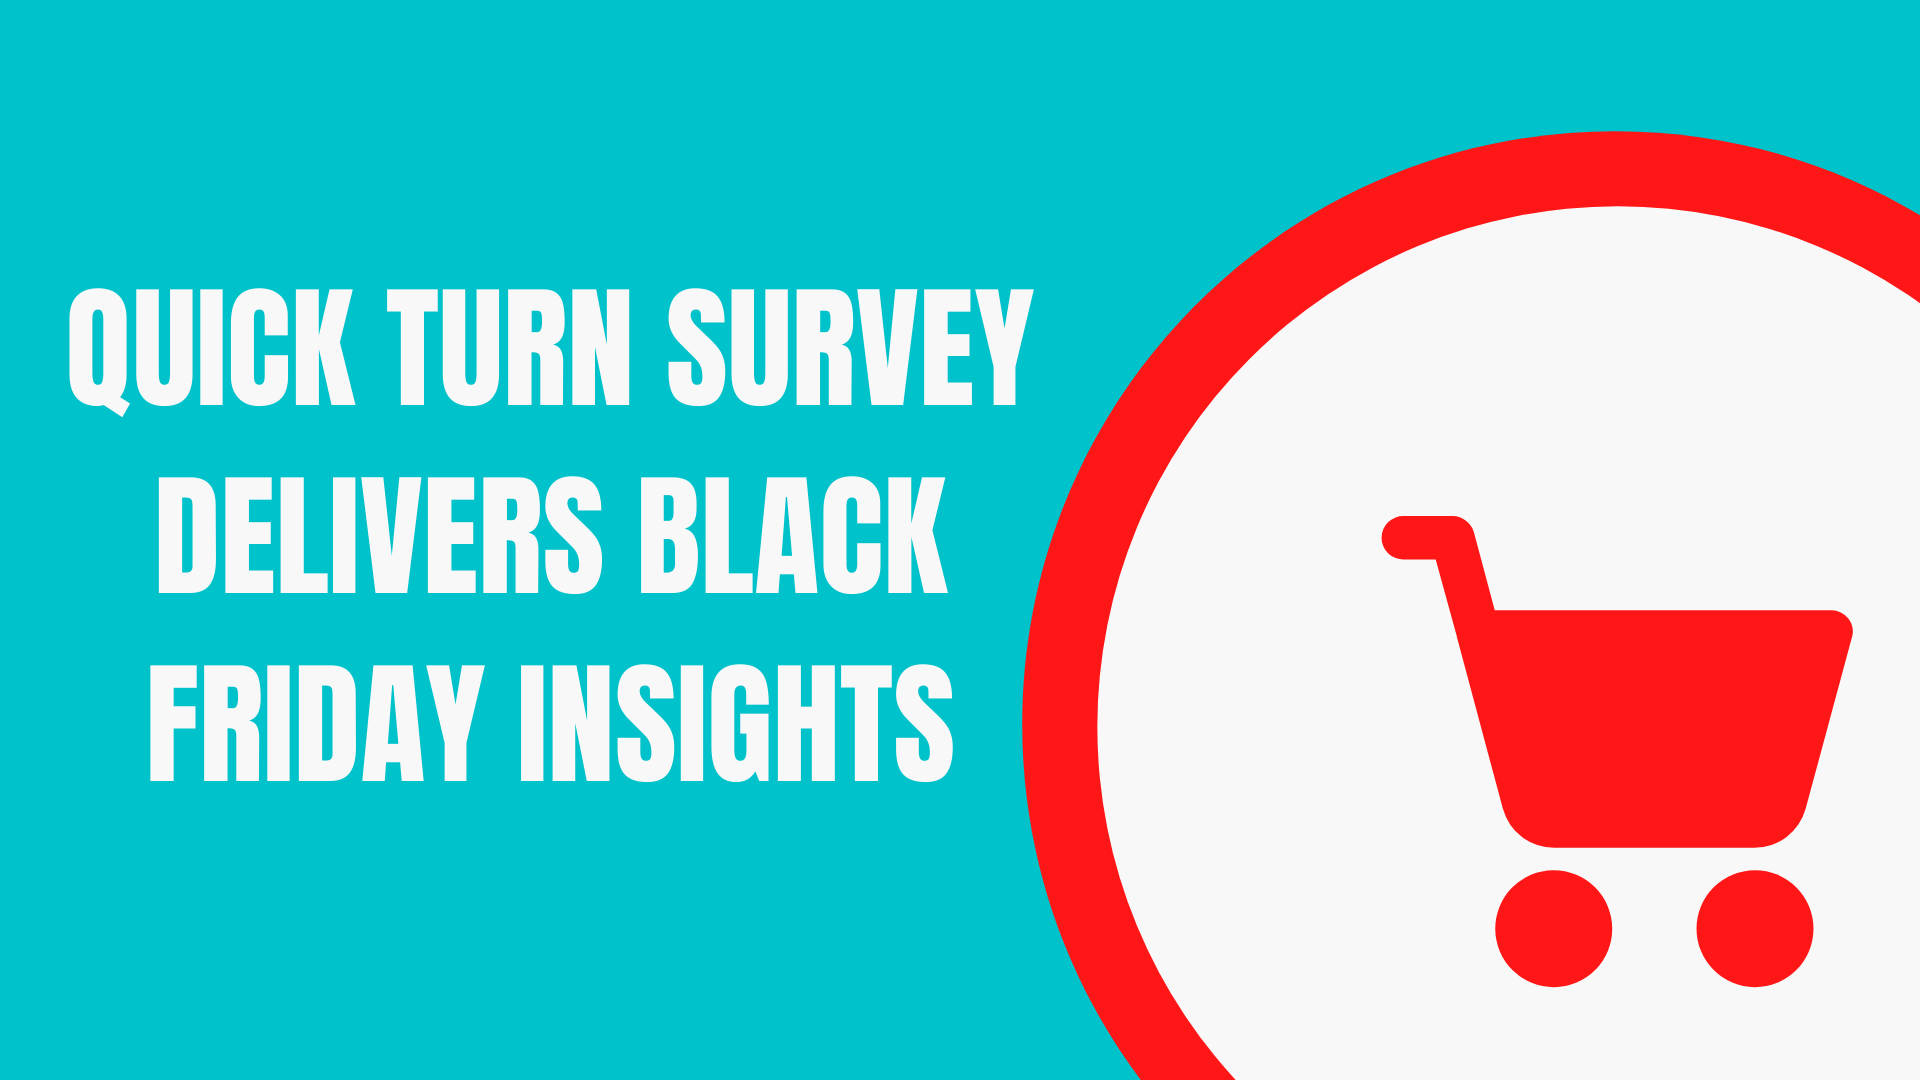 Quick Turn Survey Delivers Black Friday Insights